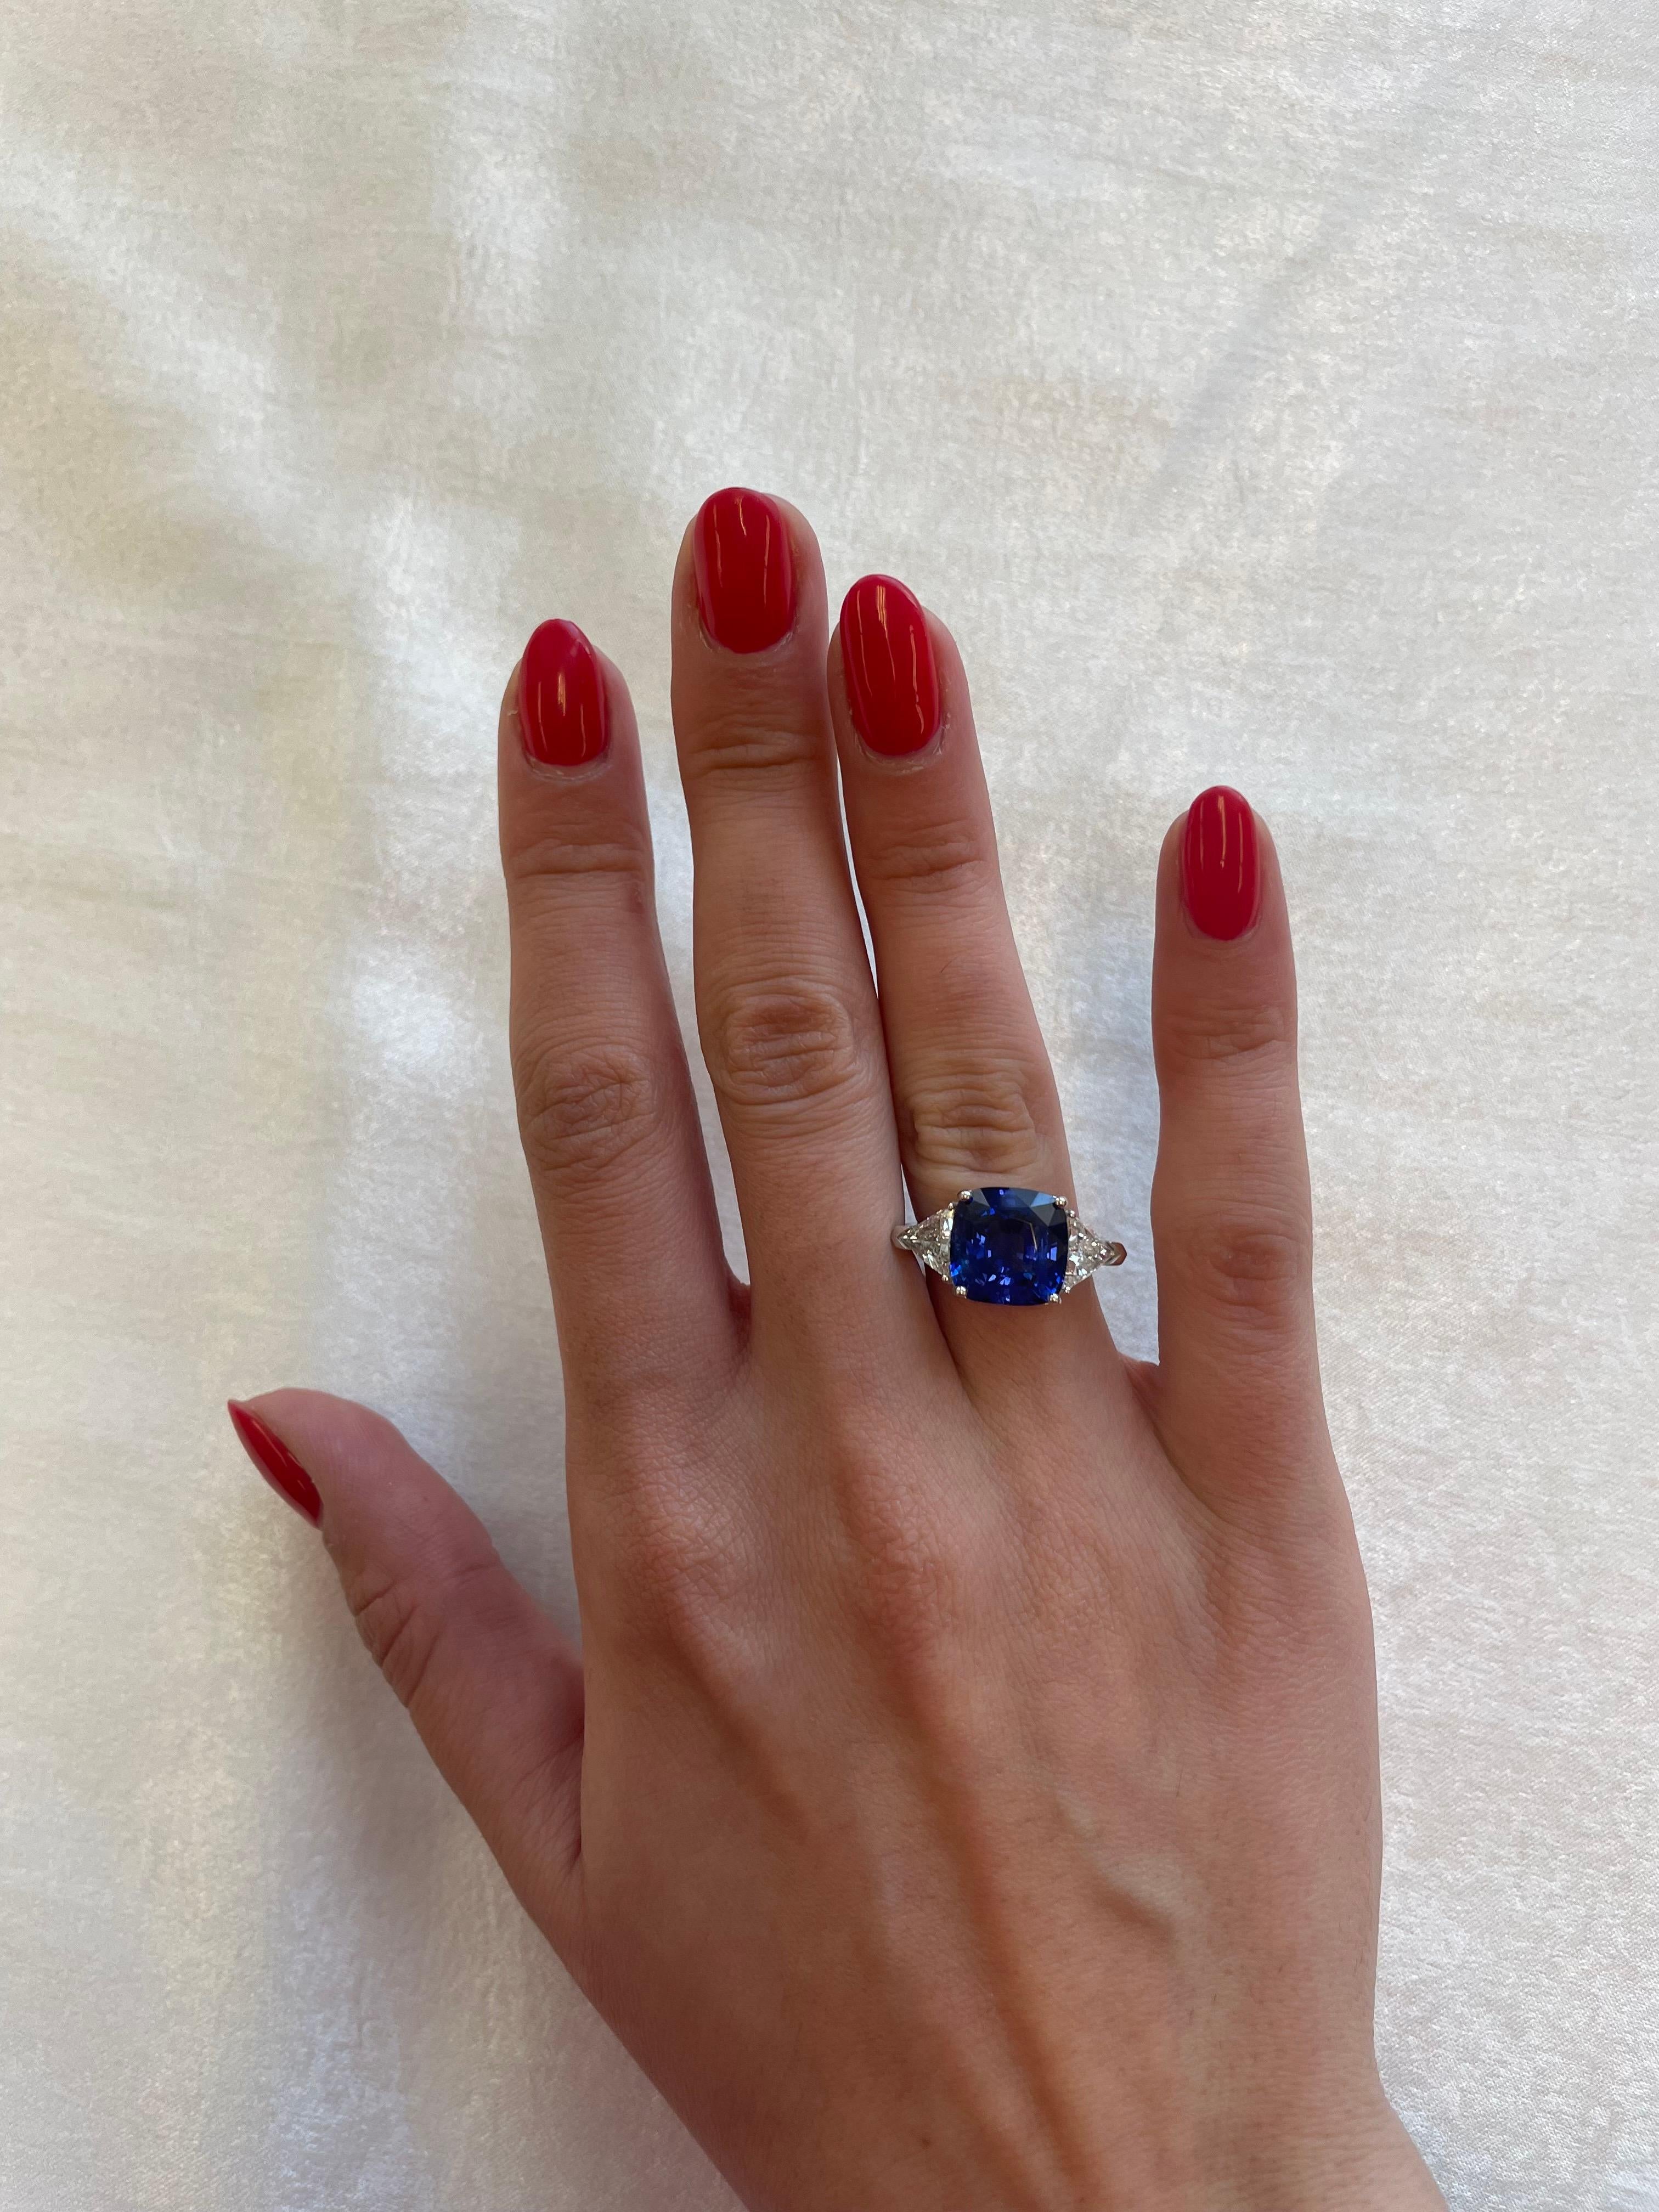 Exquisite sapphire and diamond three stone ring. High jewelry by Alexander Beverly Hills.
7.11 carat cushion sapphire, GIA certified heat. Complimented with a pair of trilliant diamonds, 1.29ct. Approximately G/H color and SI clarity. 8.40ct total